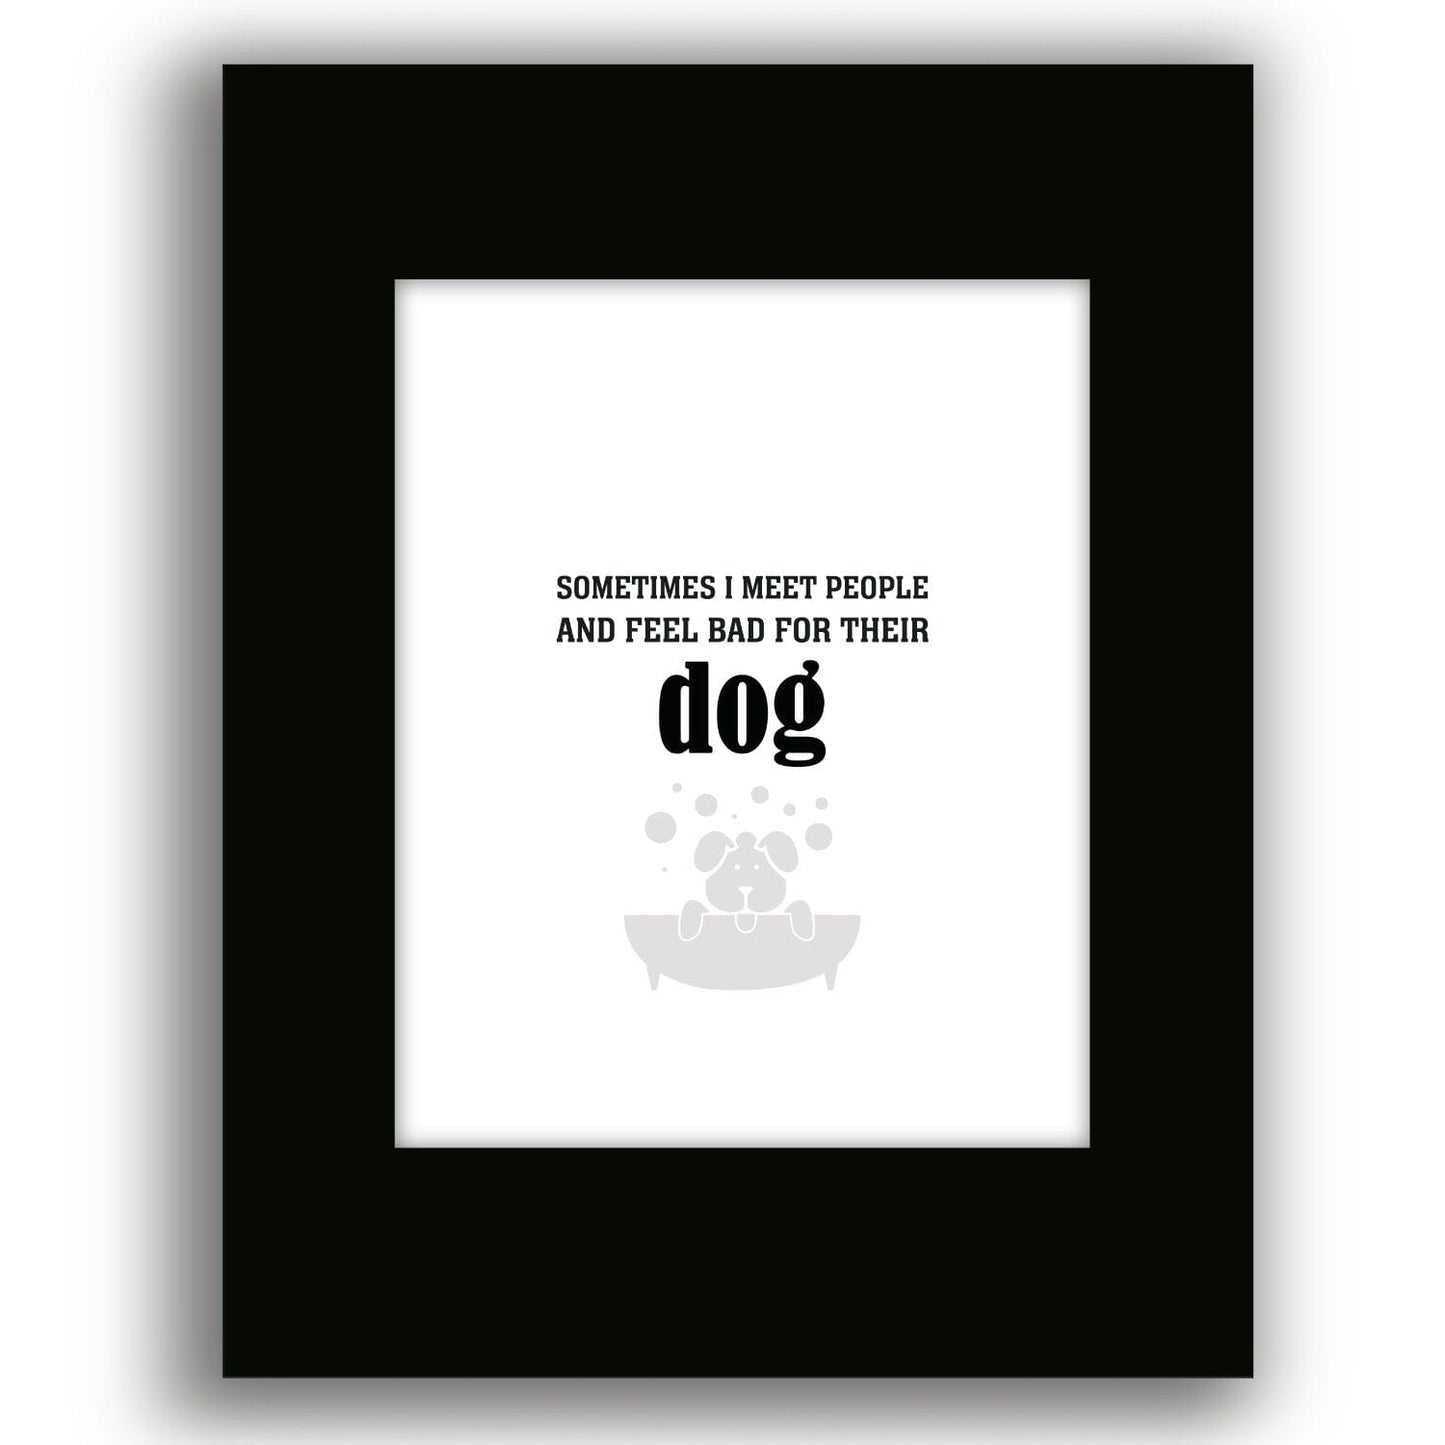 Sometimes I Meet People and Feel Bad for Their Dog Print Wise and Wiseass Quotes Song Lyrics Art 8x10 Black Matted Print 